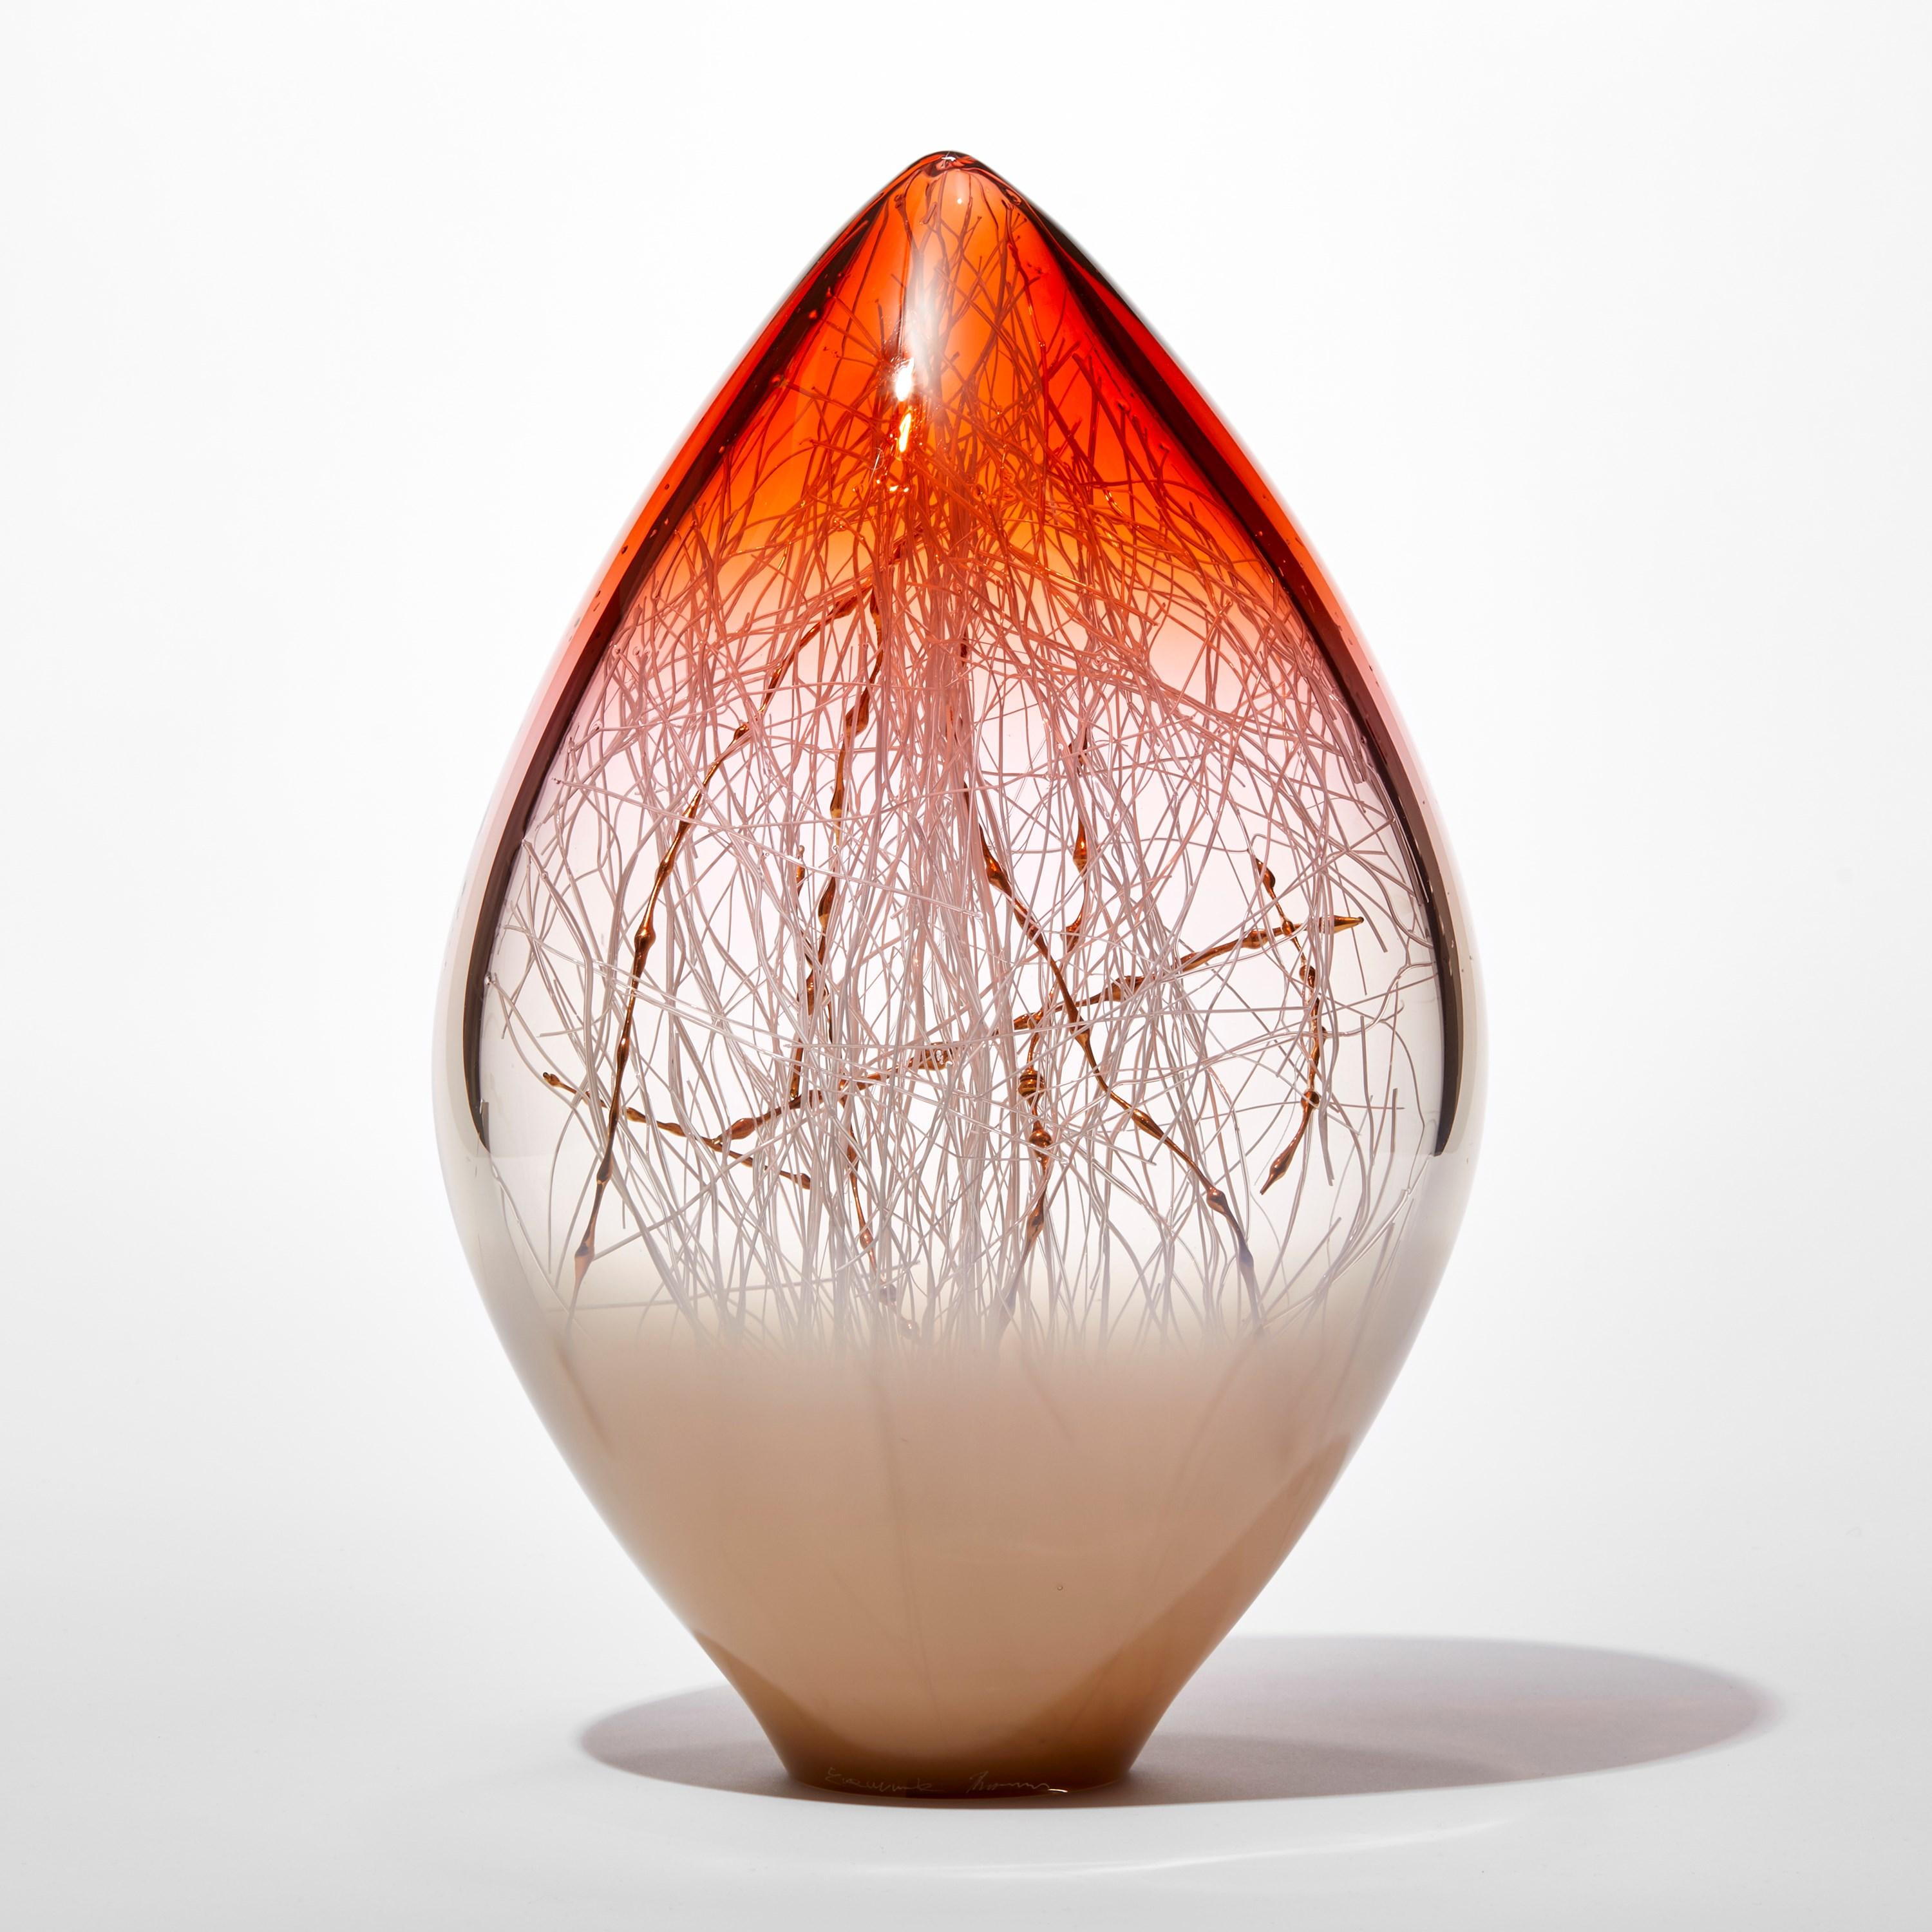 'Elixir in Weimaraner and Sunset Orange' is a unique handblown and sculpted glass artwork by the Danish and British artists, Hanne Enemark & Louis Thompson.

The outer glass form contains a multitude of fine white canes of glass, some of which have